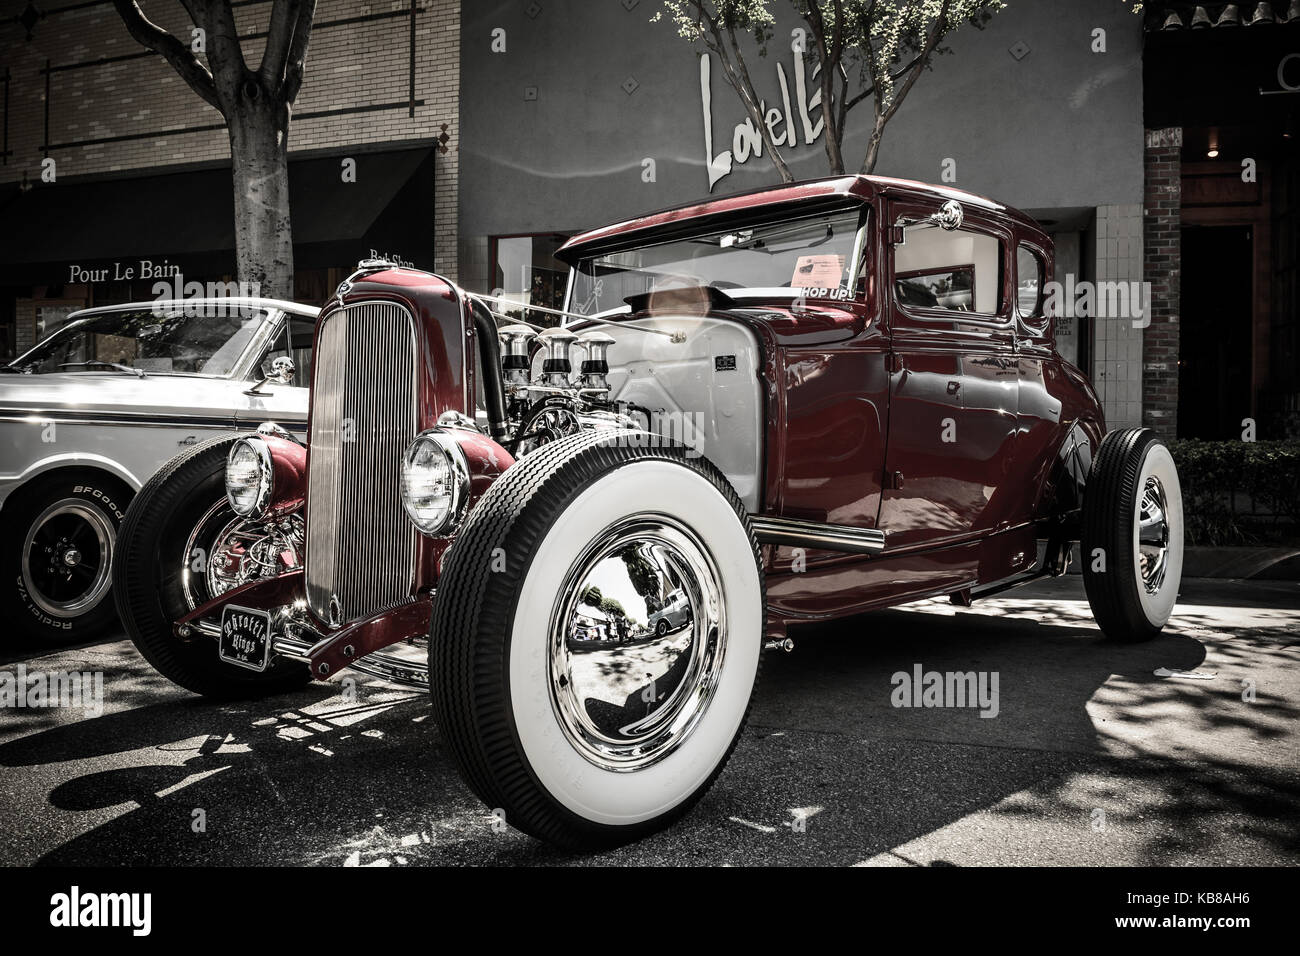 1930 Ford Model A owned by Peter Rodriguez on display at the 17th Annual Uptown Whittier Car Show in Whittier, CA Stock Photo